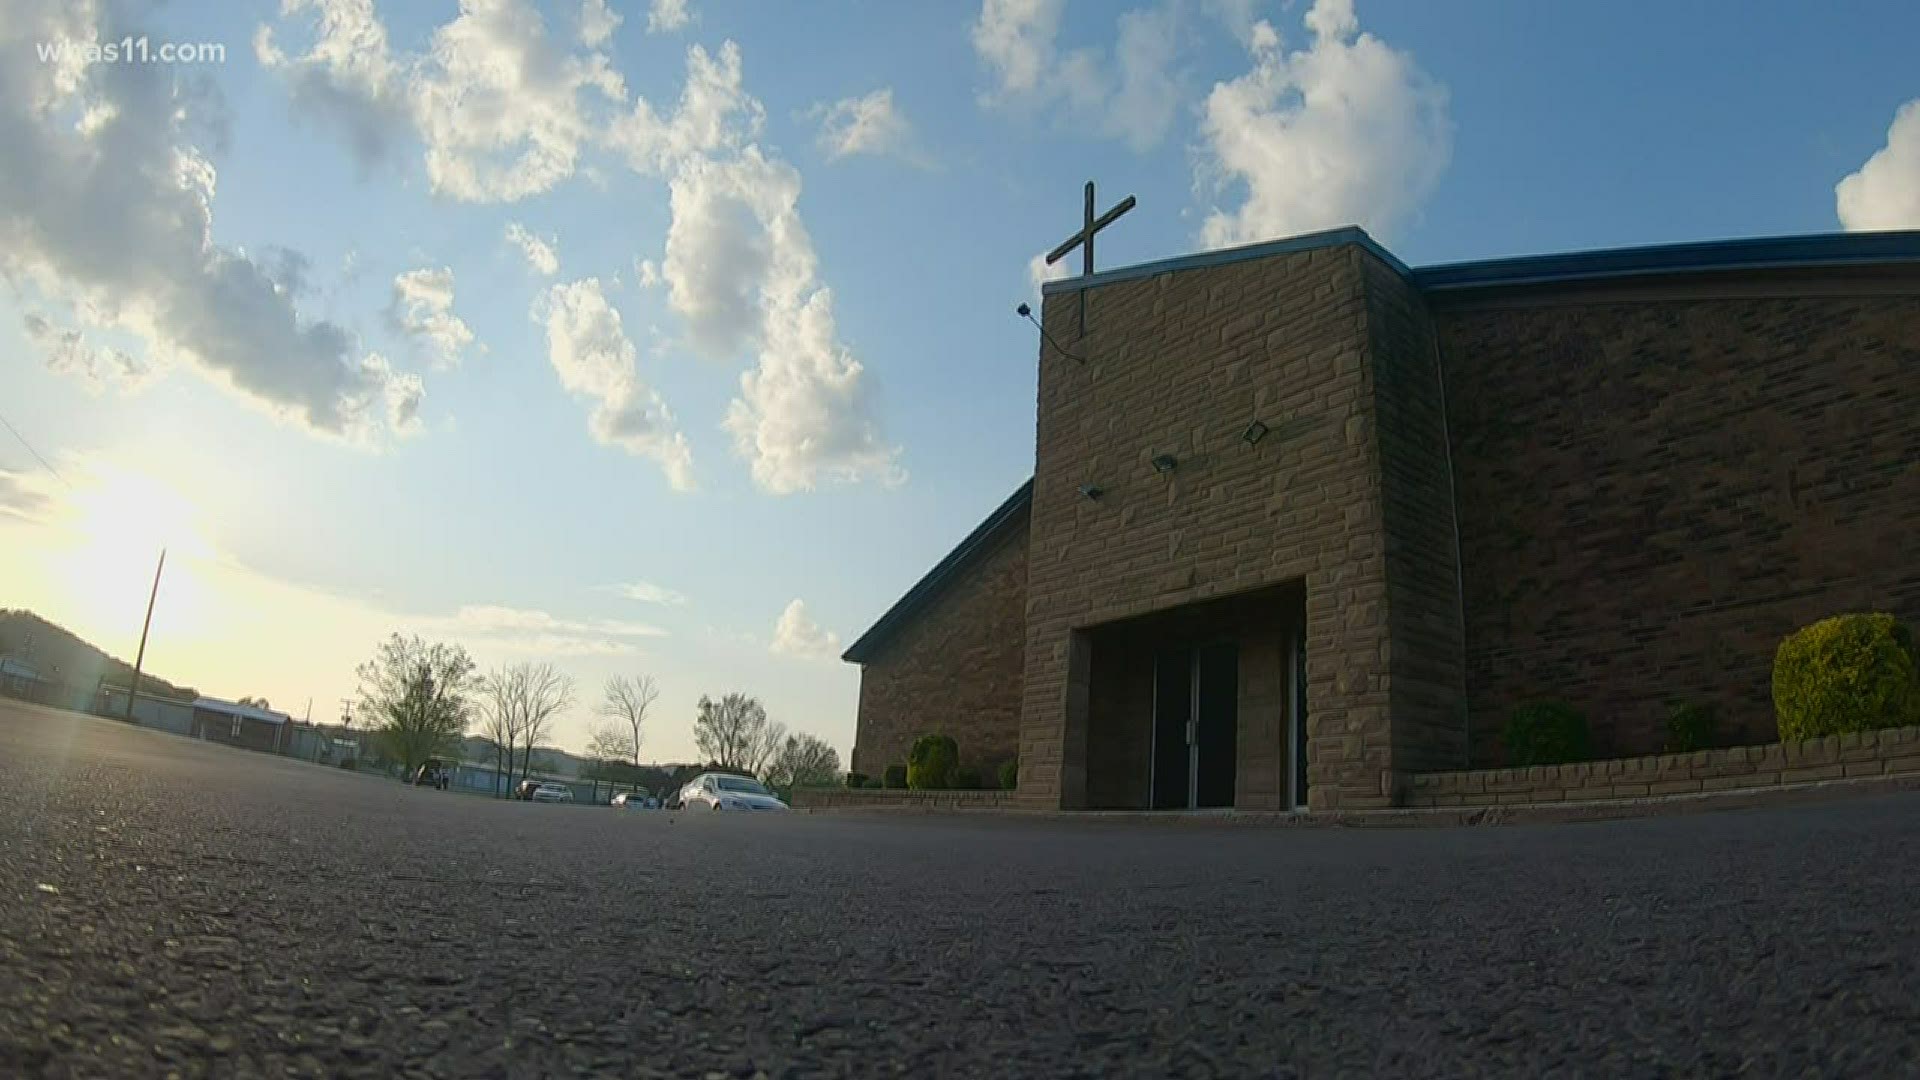 They say he violated their constitutional rights after they attended an in-person service at Maryville Baptist and were told they'd have to quarantine.